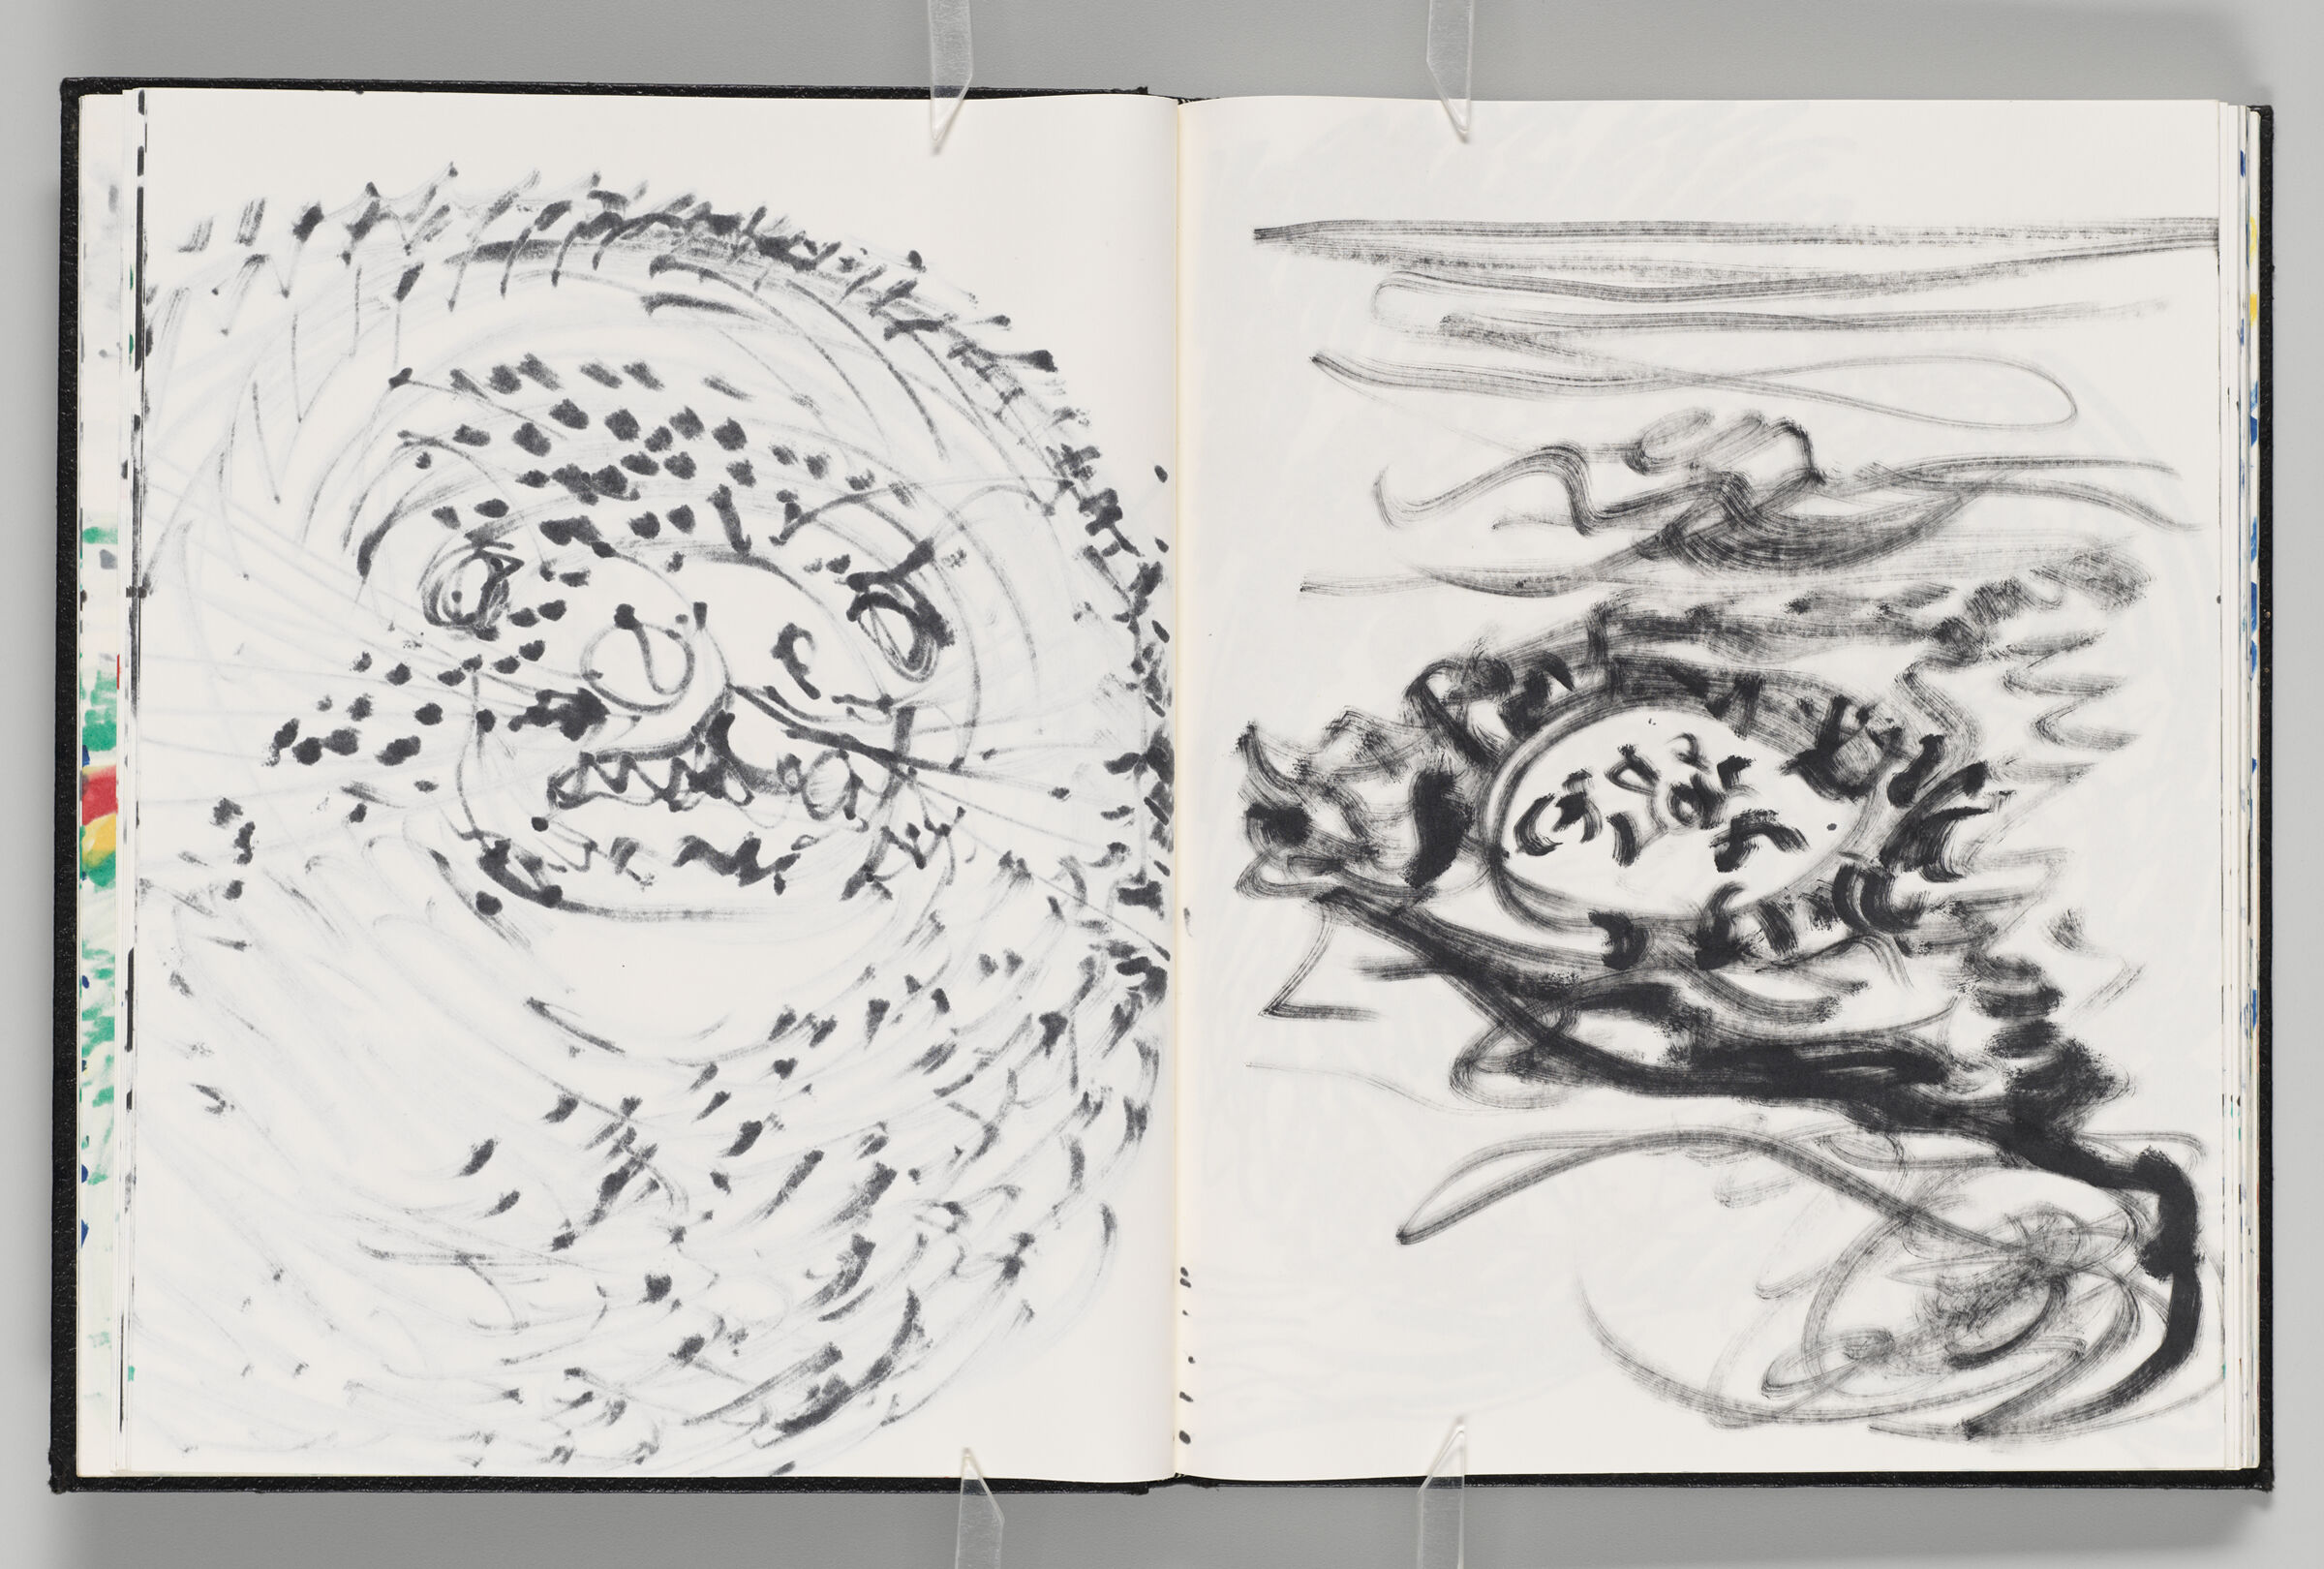 Untitled (Bleed-Through Of Previous Page, Left Page); Untitled (Seals In The Distance, Right Page)